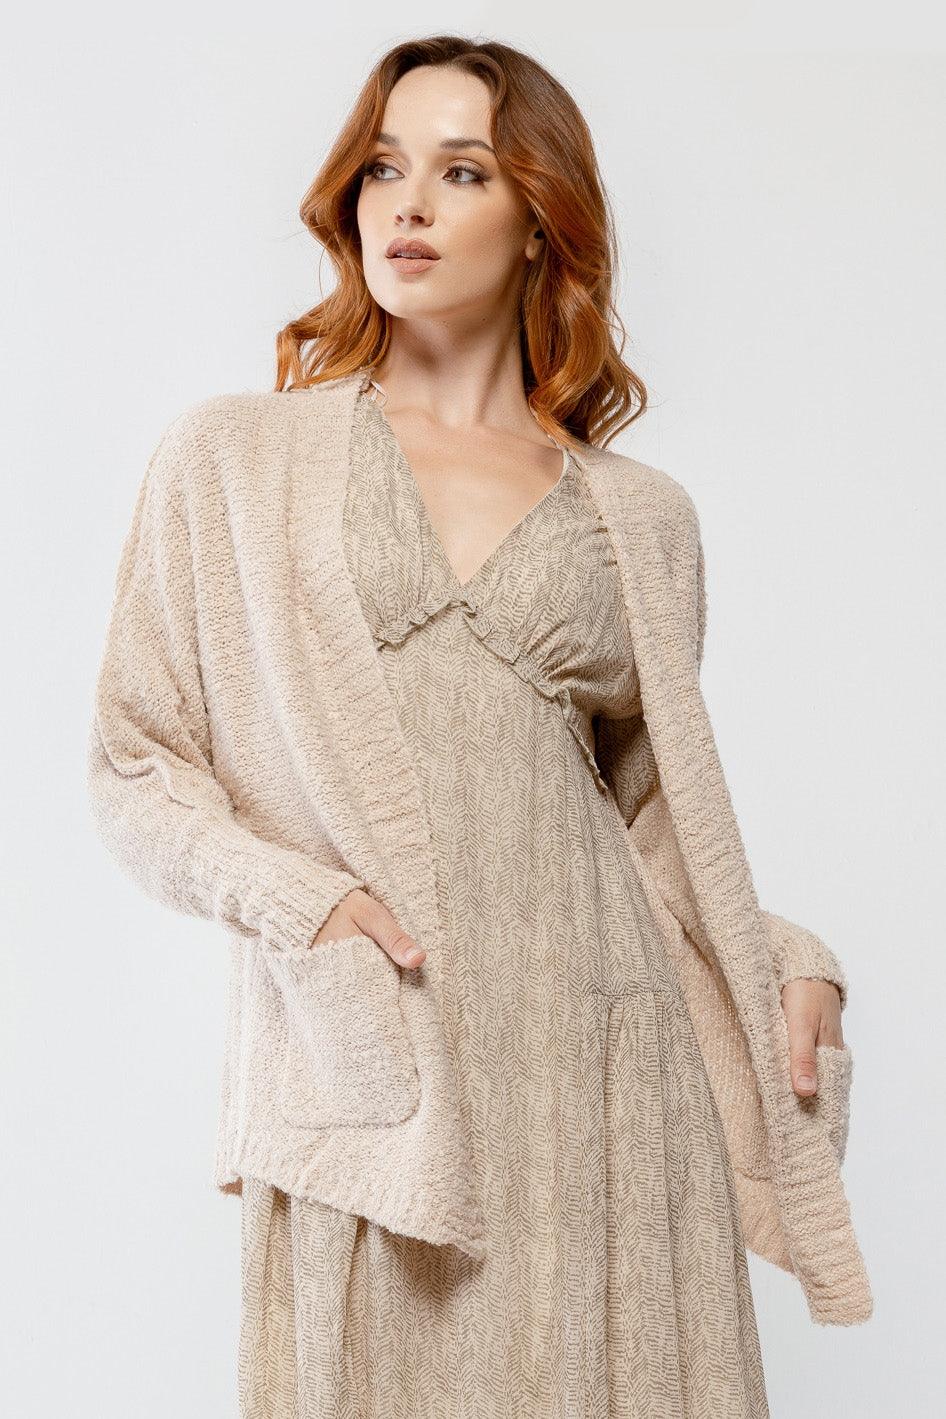 Cream Knit Textured Two Pocket Open Front Cardigan /2-2-2